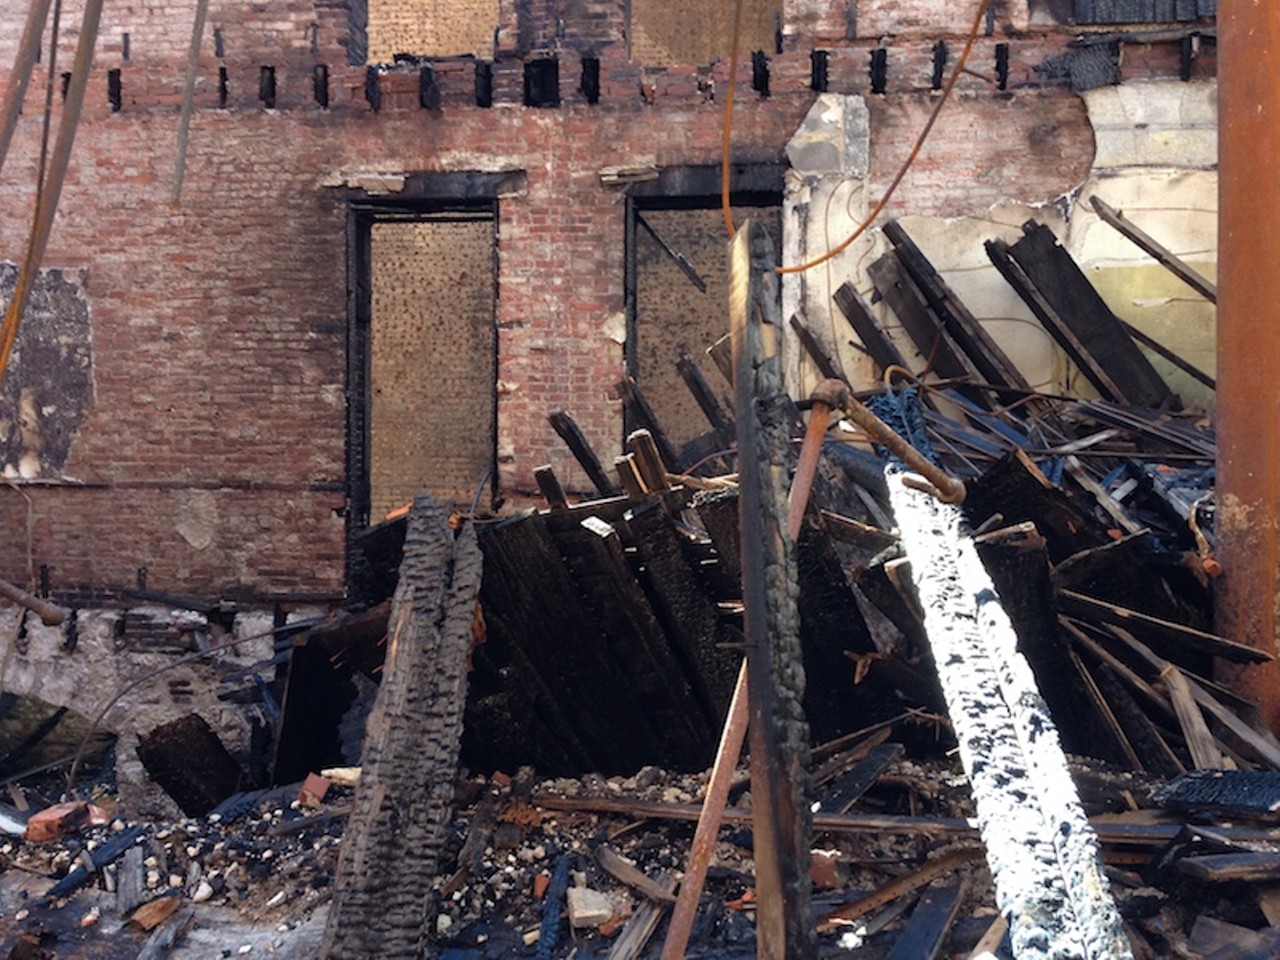 Chilling Photos Show Clemens House's Devastation After July Blaze